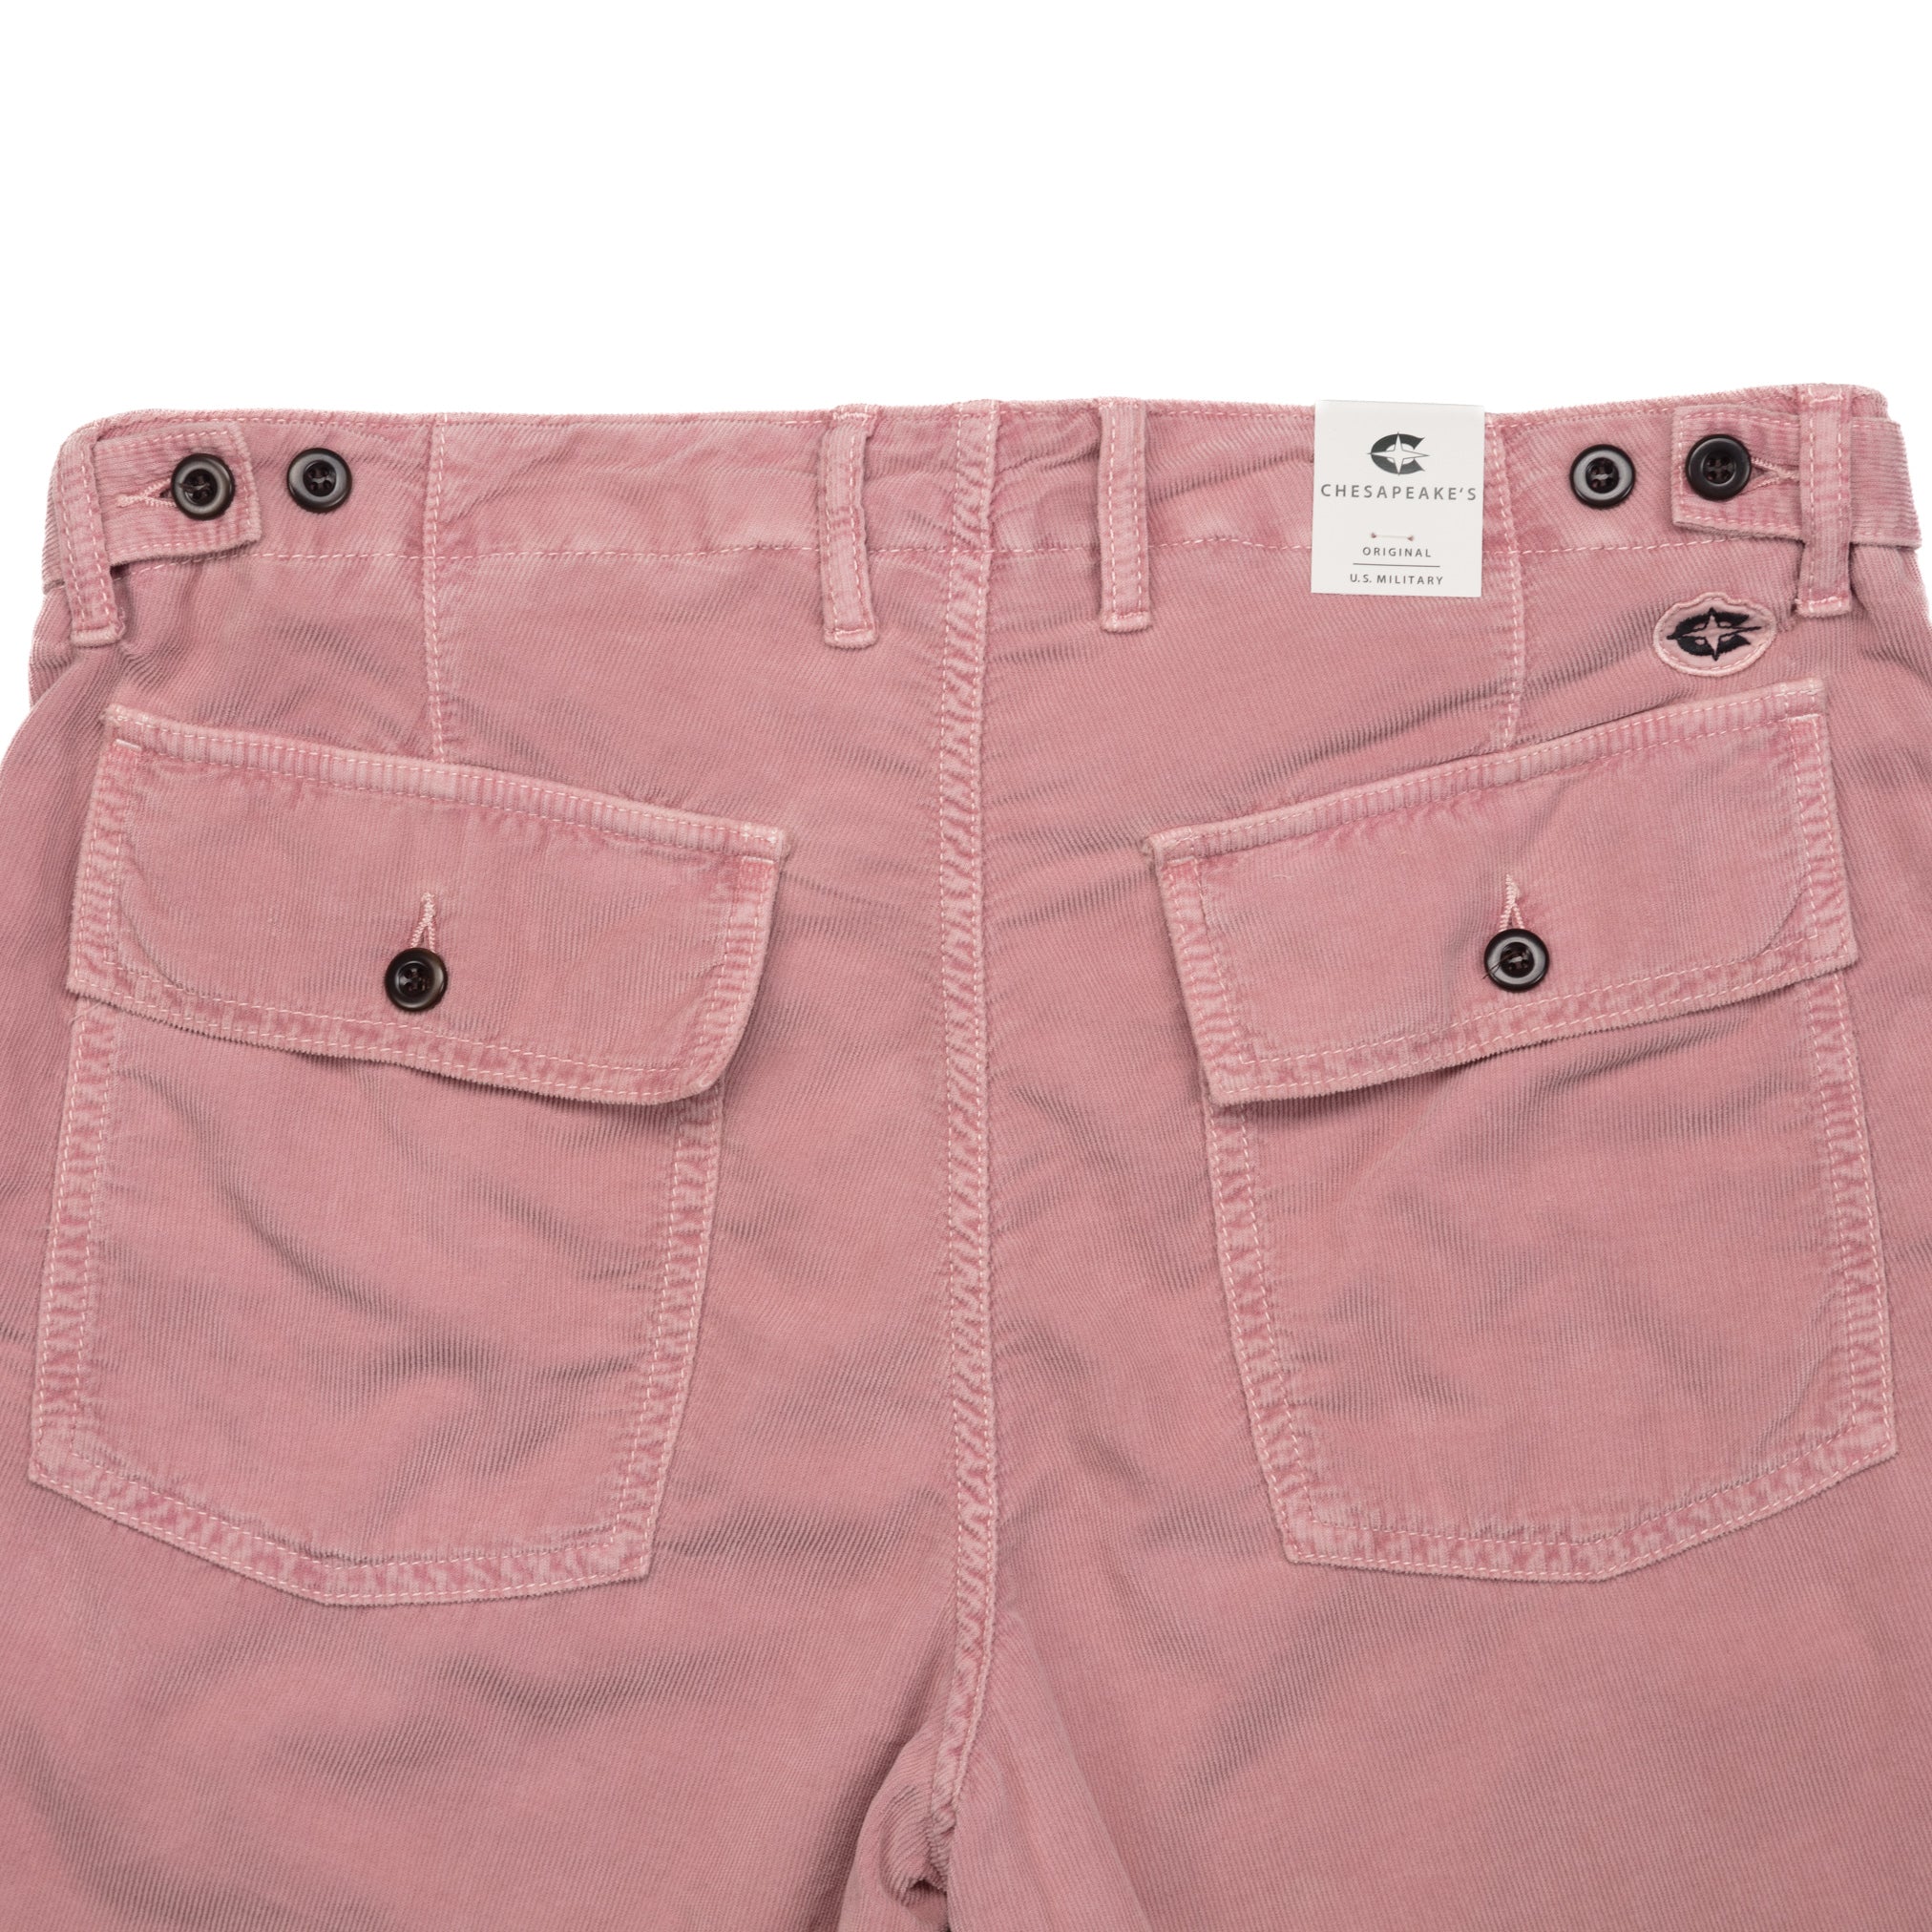 Shannon Fatigue Shorts in Coral Cord